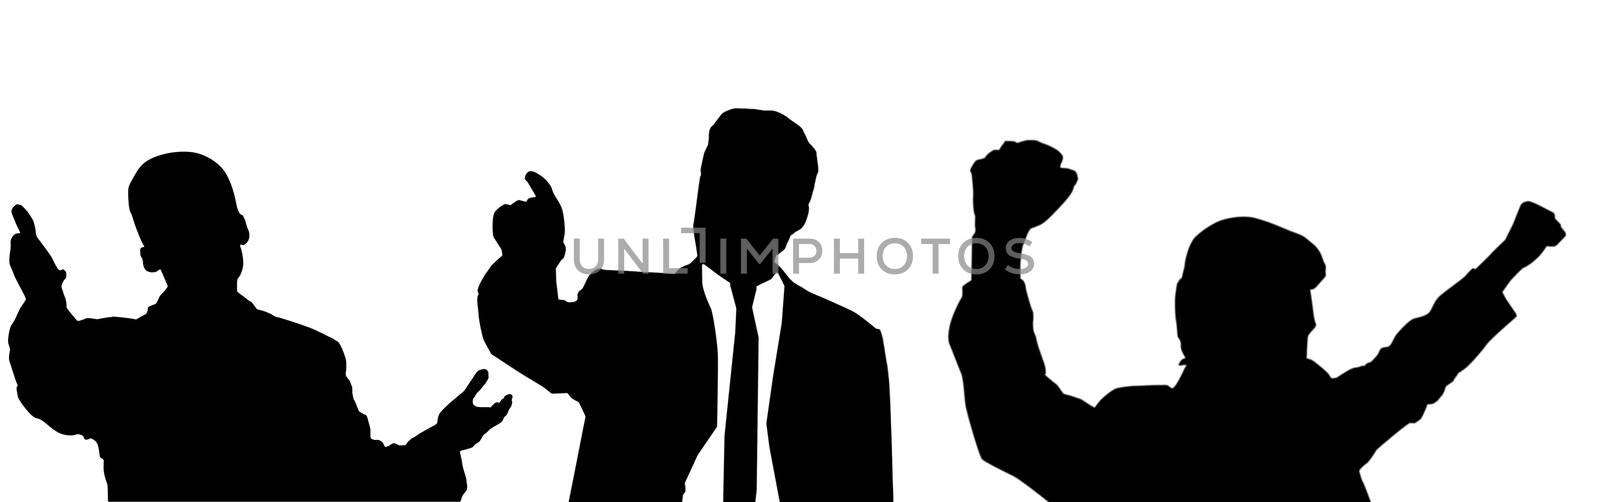 An image of silhouette of people